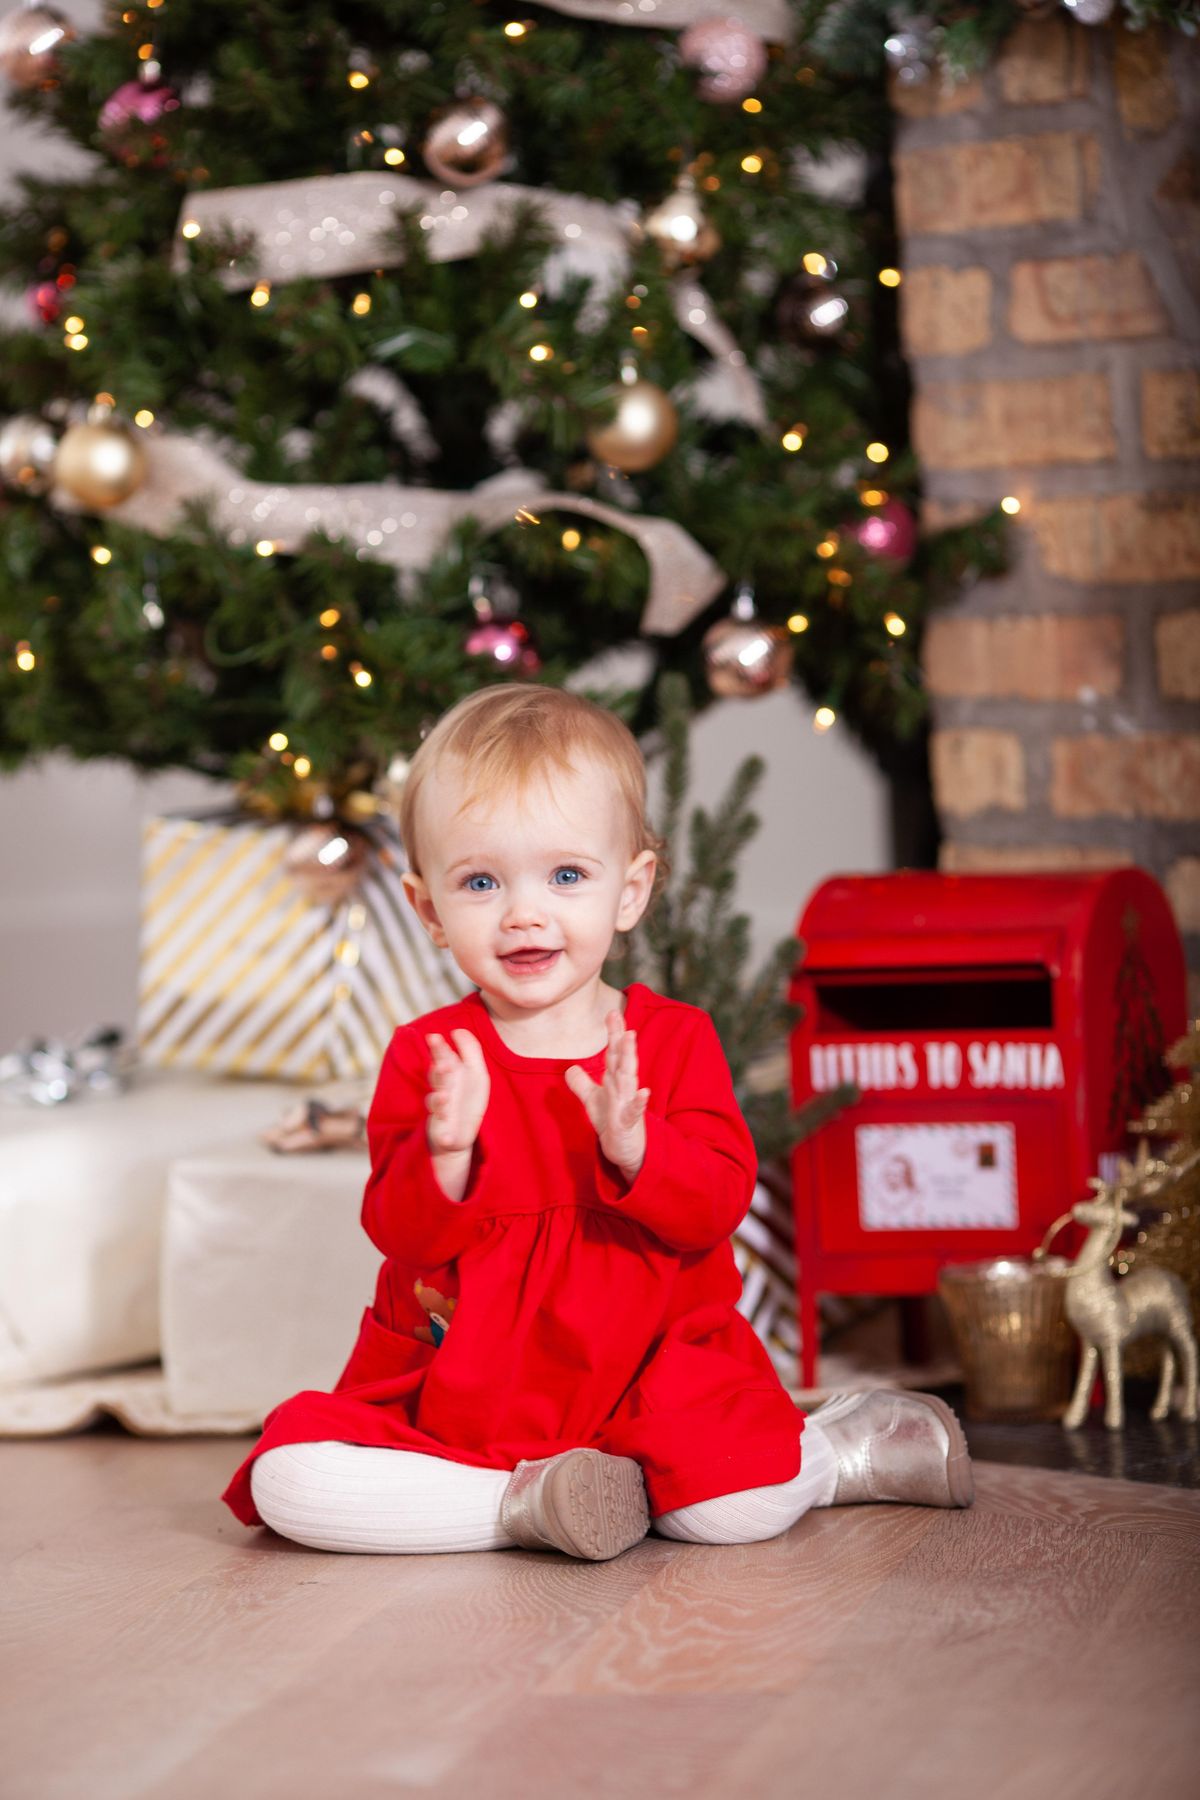 CHICAGO HOLIDAY MINI KIDS OR FAMILY PHOTOGRAPHY SESSIONS - NOV 26th 2022